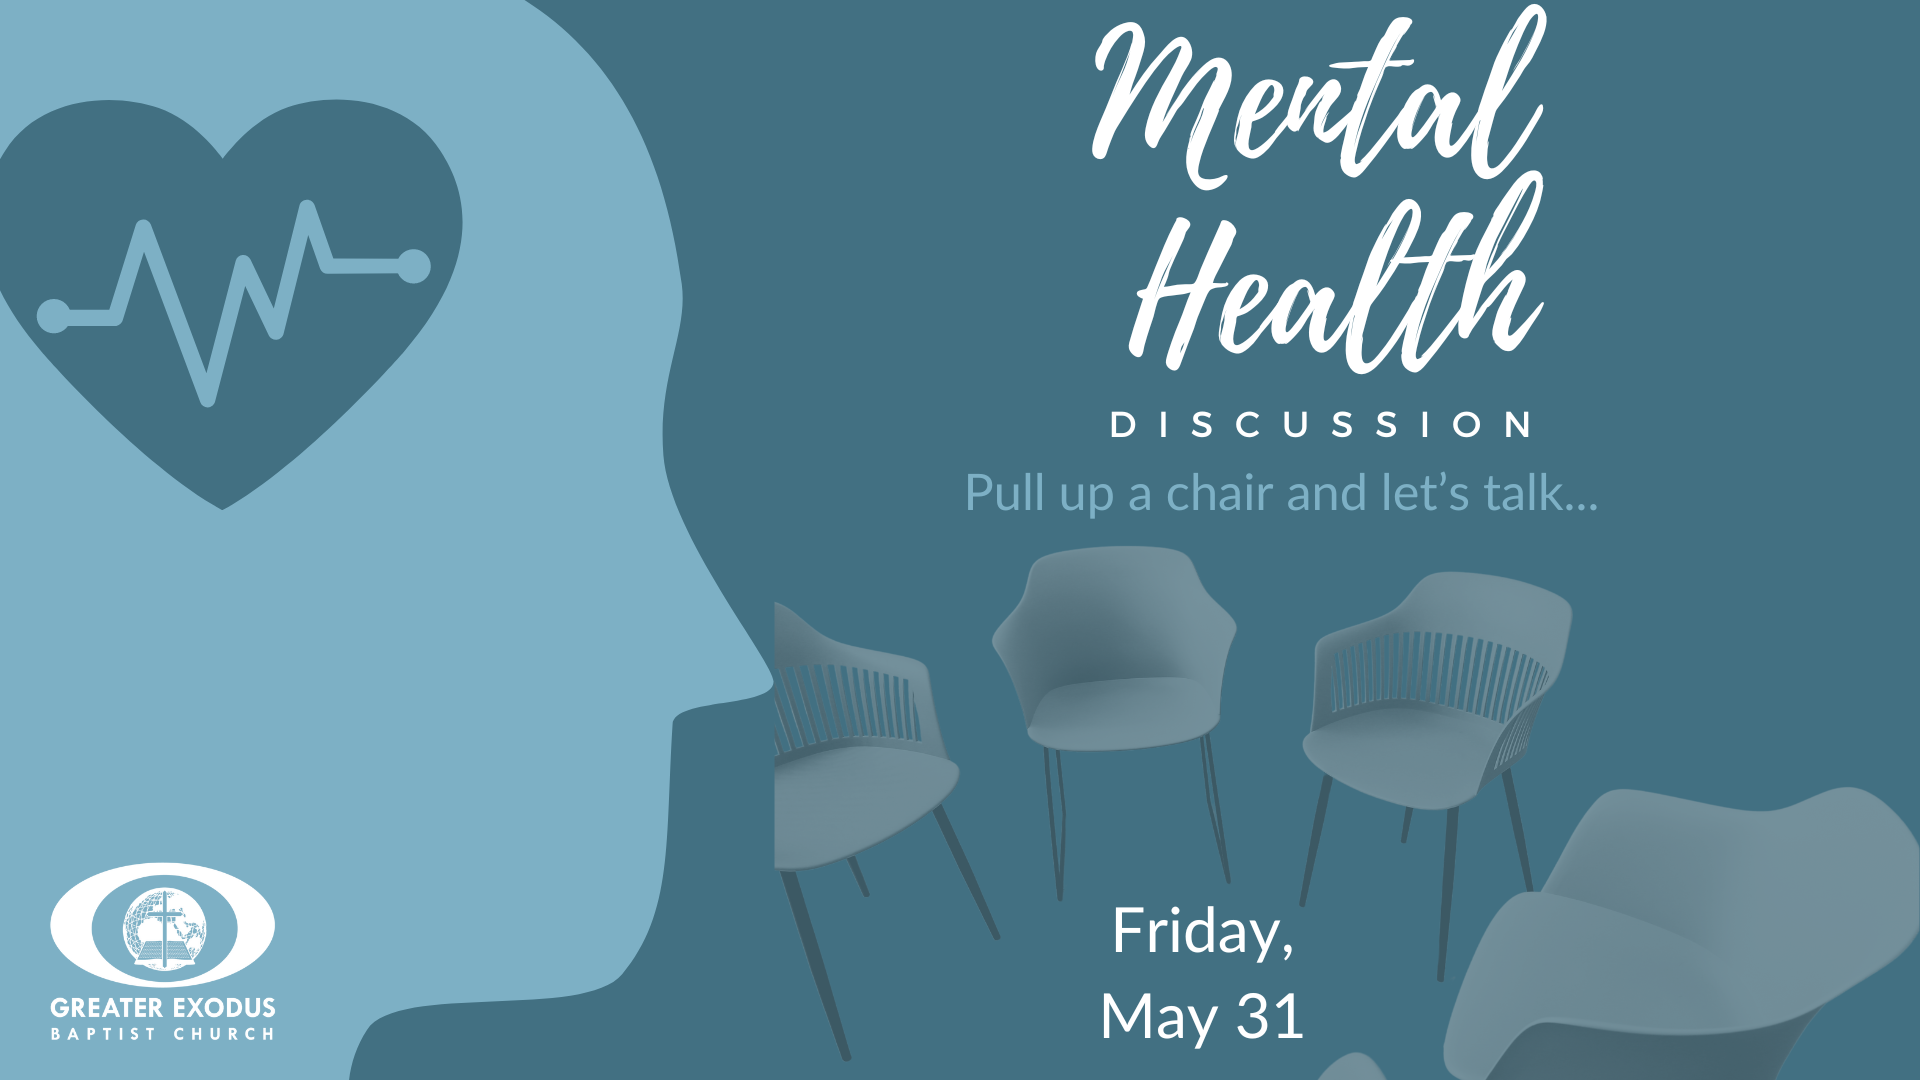 A poster for a mental health discussion on friday may 31